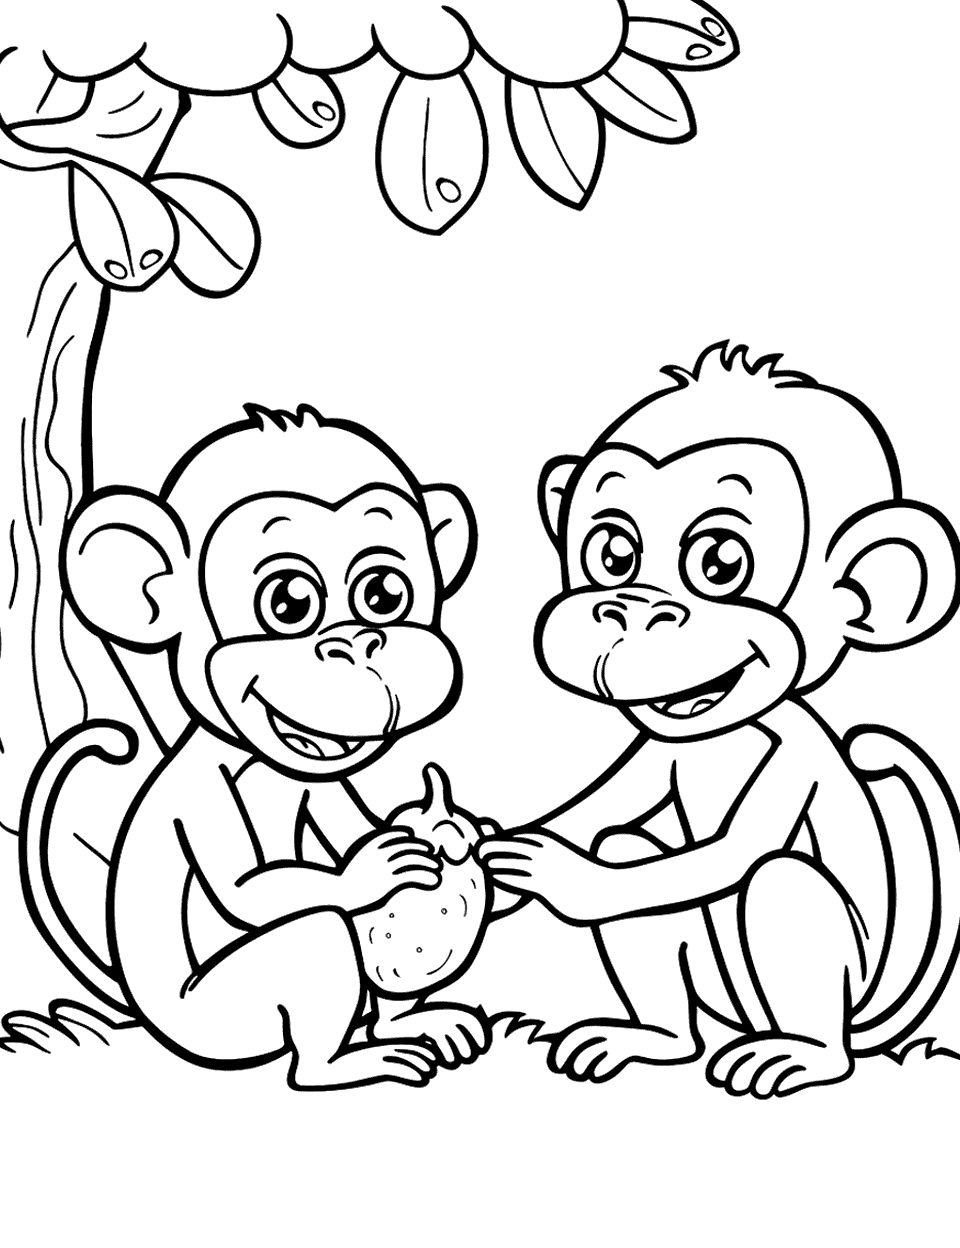 Two Monkeys Sharing Fruit Monkey Coloring Page - A peaceful scene where two monkeys share a piece of fruit under a tree.